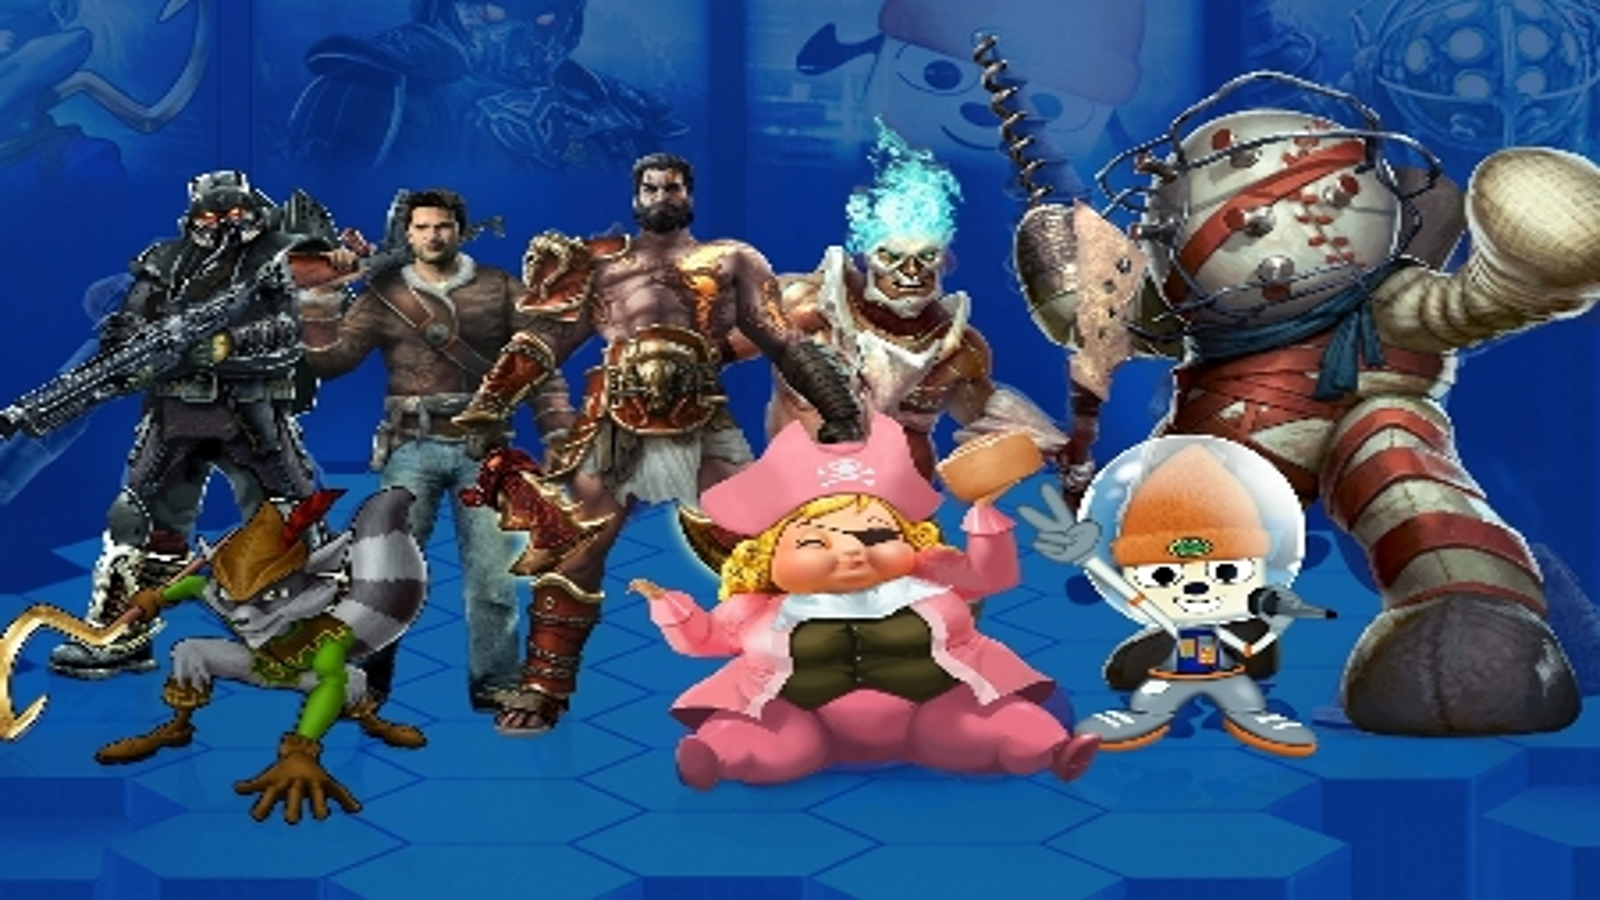  PlayStation All-Stars Battle Royale : Video Games